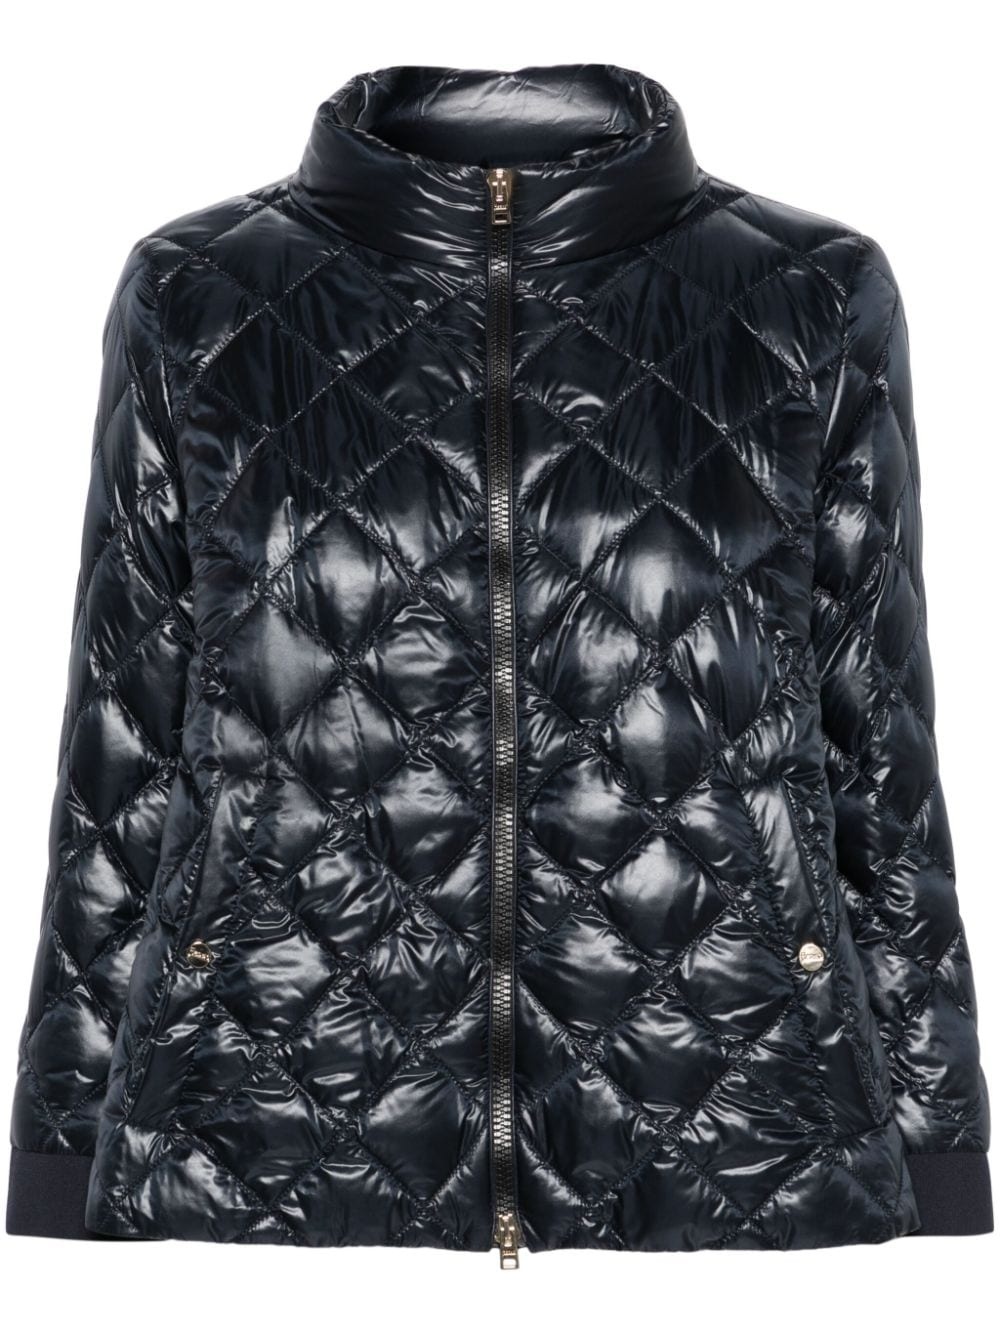 diamond-quilted zipped jacket - 1